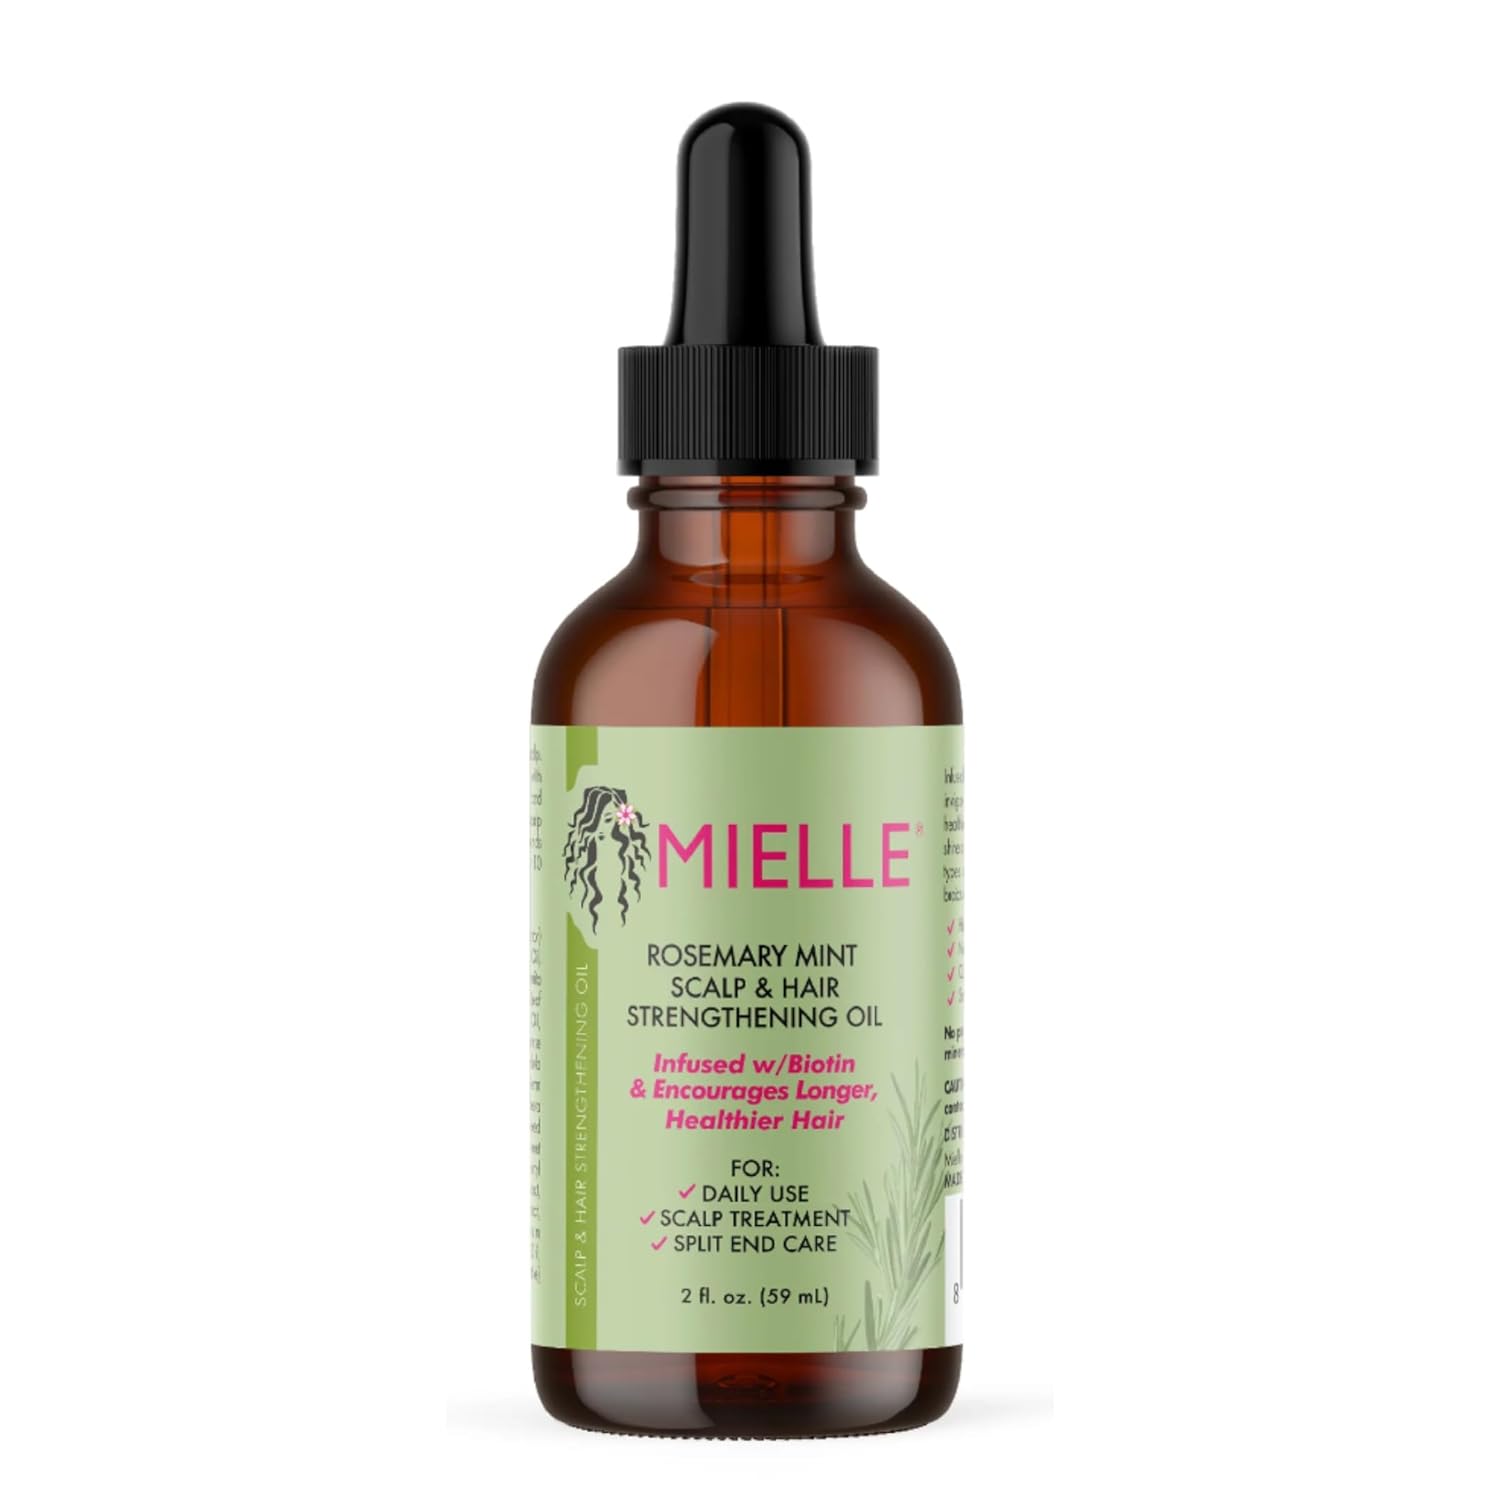 Mielle Rosemary Mint Scalp and Hair Strengthening Oil 59ml pruii